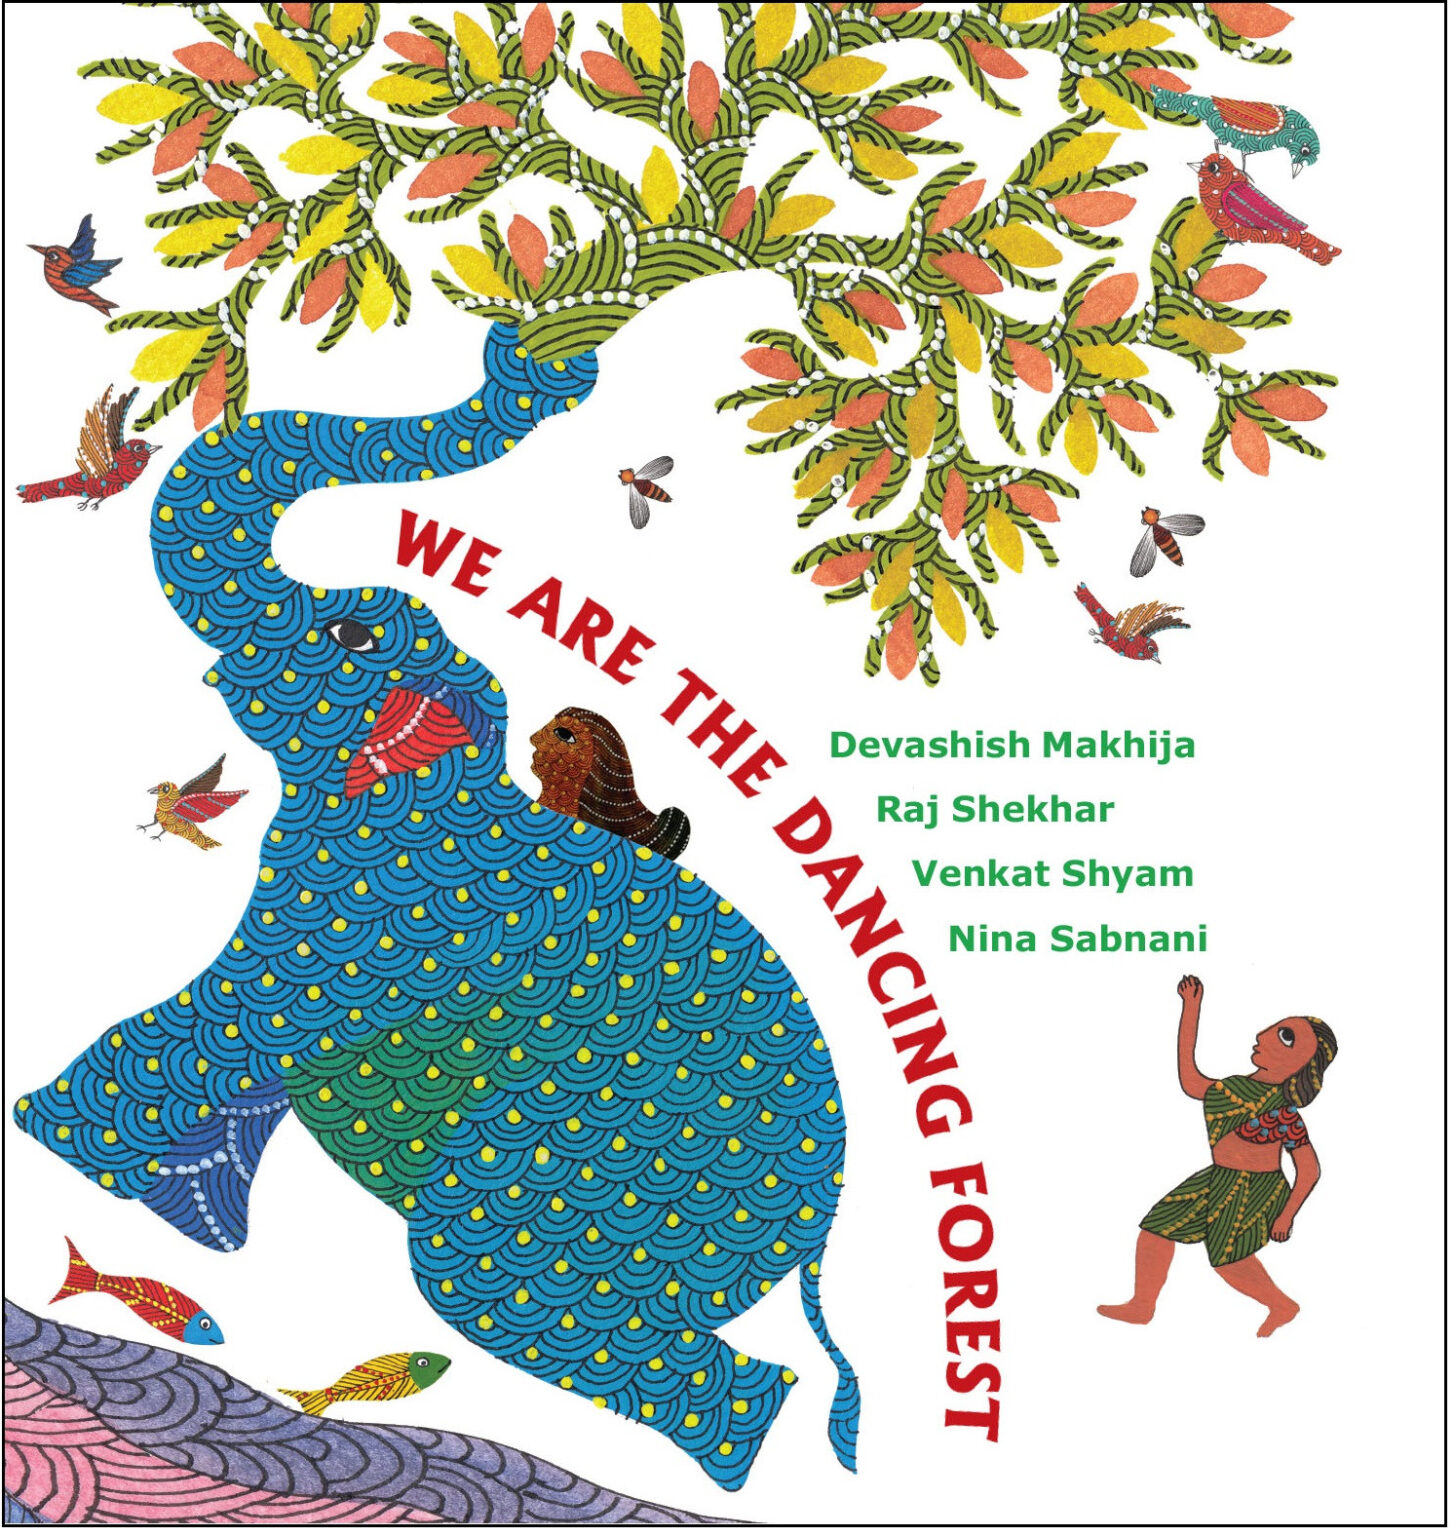 Cover for We Are the Dancing Forest featuring a collage-like illustration of a blue polka dotted elephant with a tree coming out of it's trunk running up a purple hill to the left surrounded by birds with a person on top of it while another person chases from behind. The background is white and the title is displayed in bright red and curves along the back of the elephant. The remaining text is displayed in bright green.